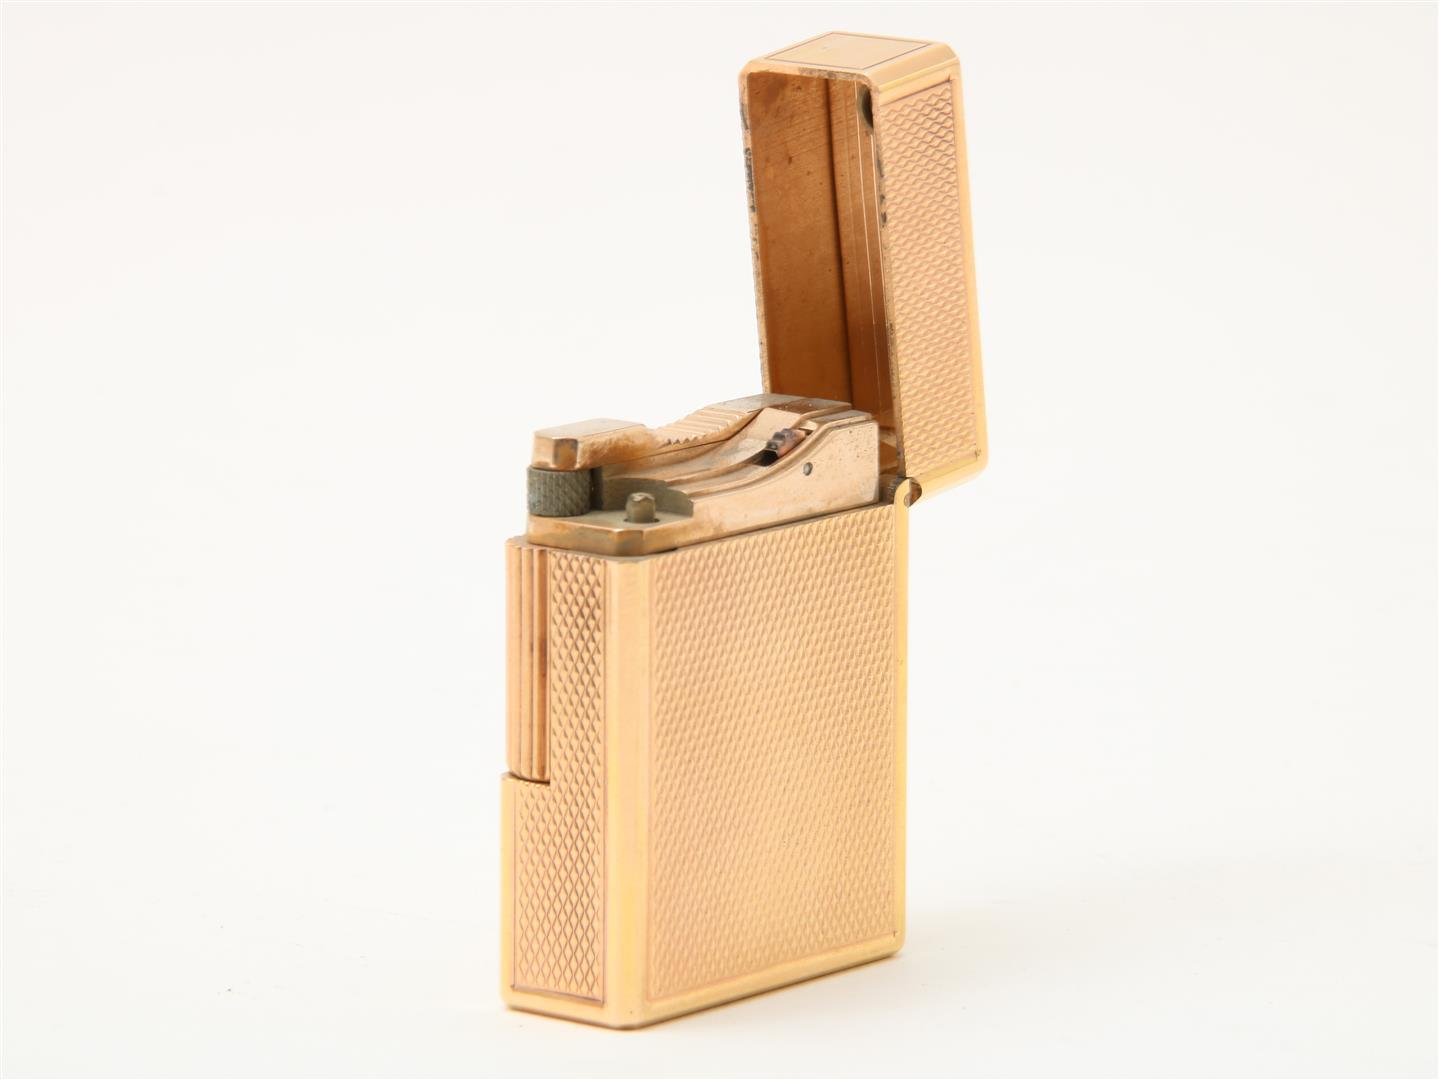 Gold-plated lighter, S.T. Dupont, in original box, numbered BG7361, height 4.8 cm.